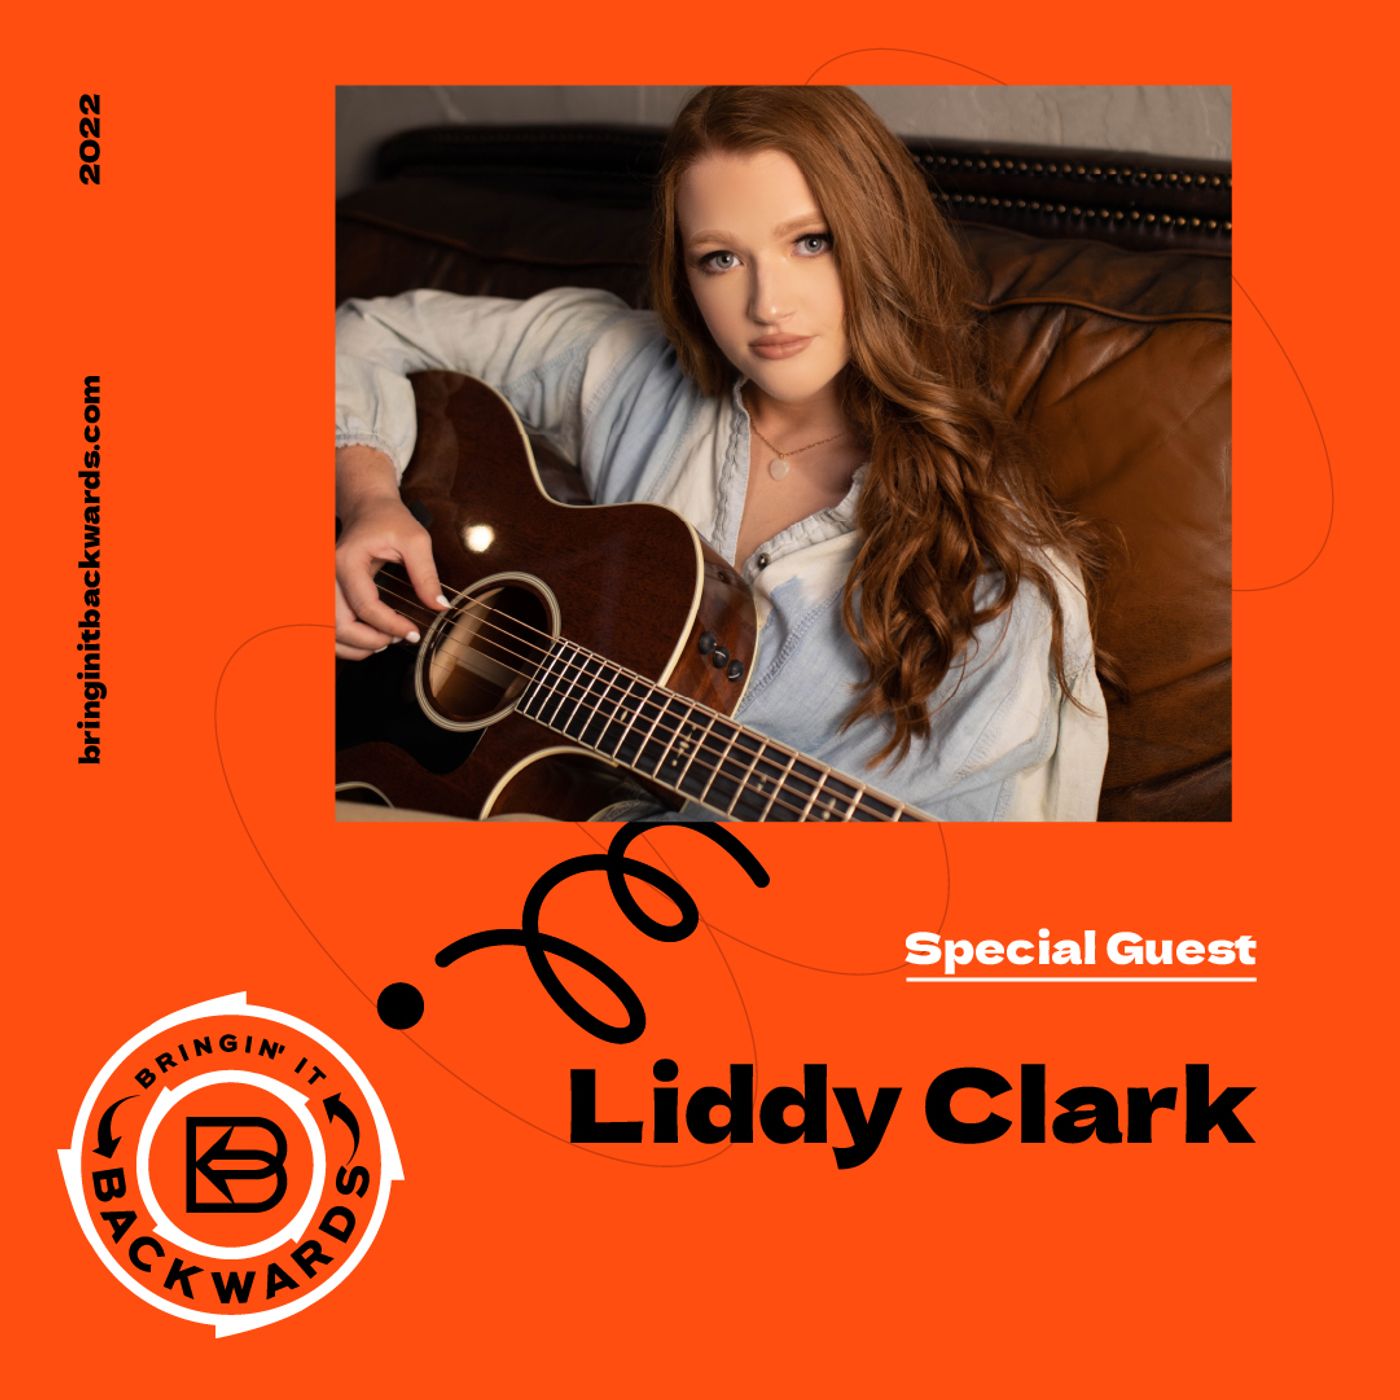 Interview with Liddy Clark